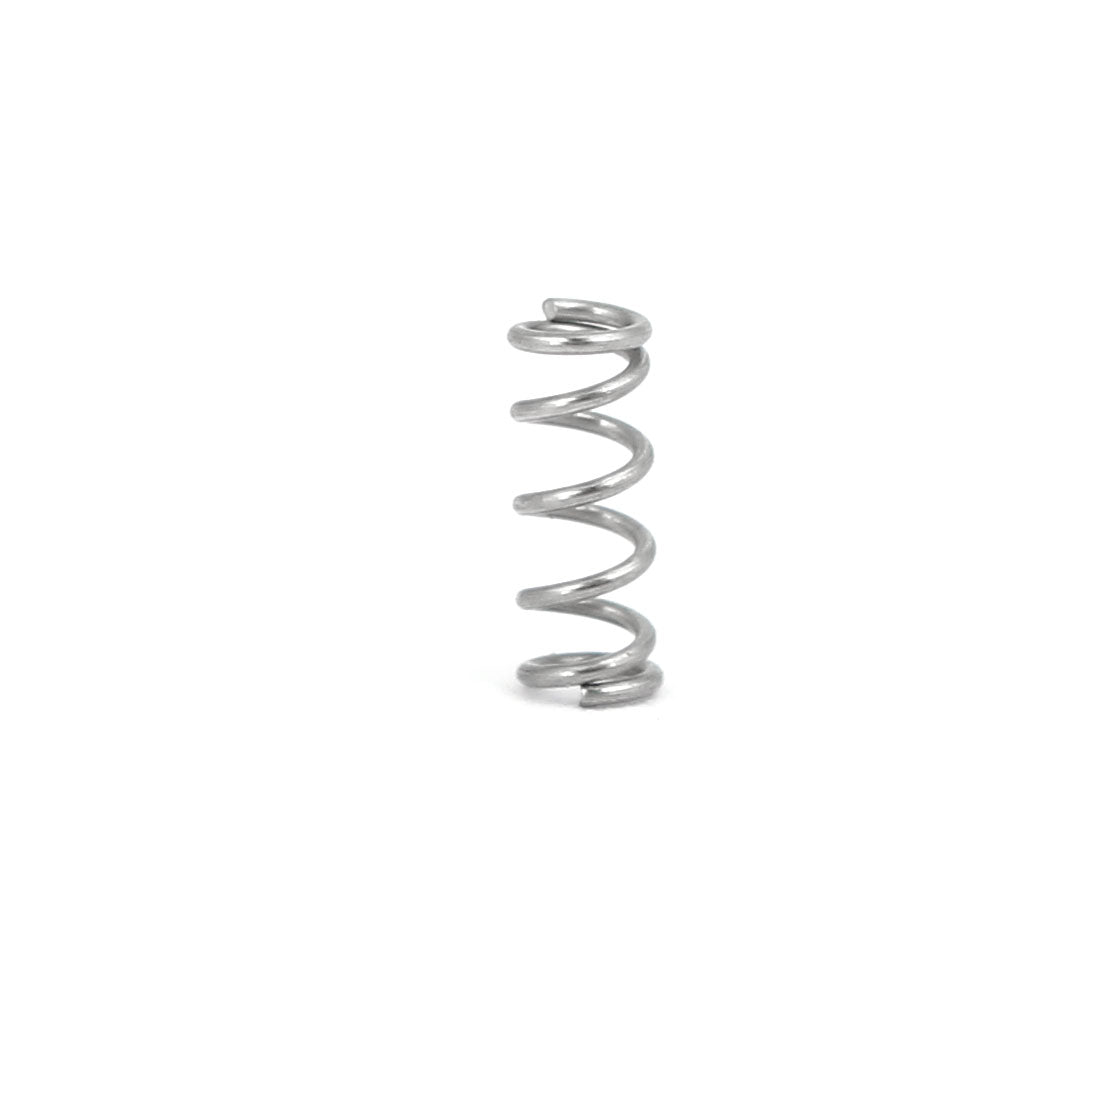 uxcell Uxcell 0.3mmx2mmx5mm 304 Stainless Steel Compression Springs Silver Tone 10pcs